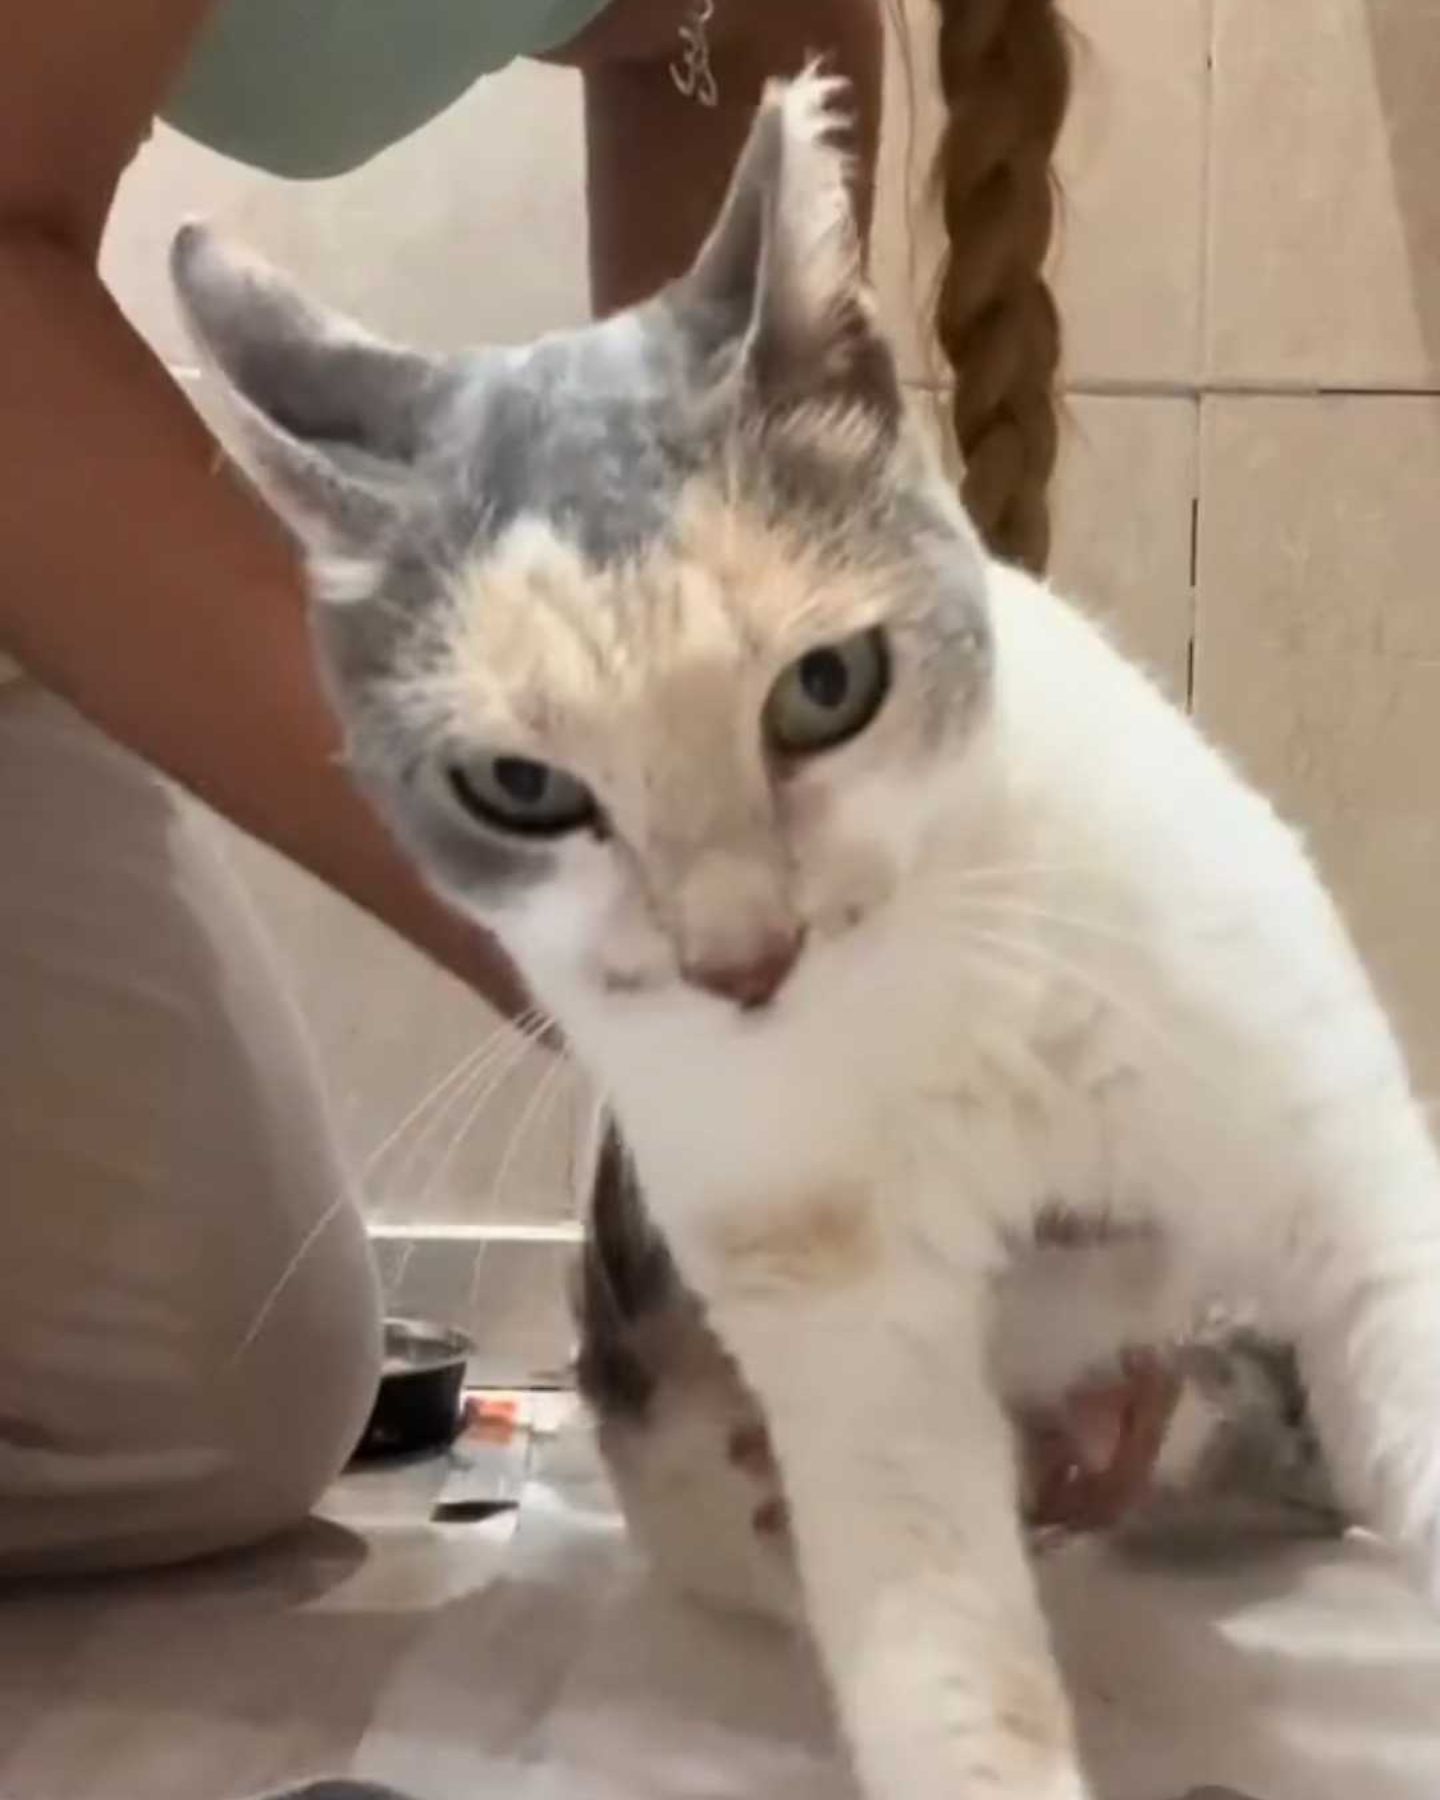 woman helping paralyzed cat